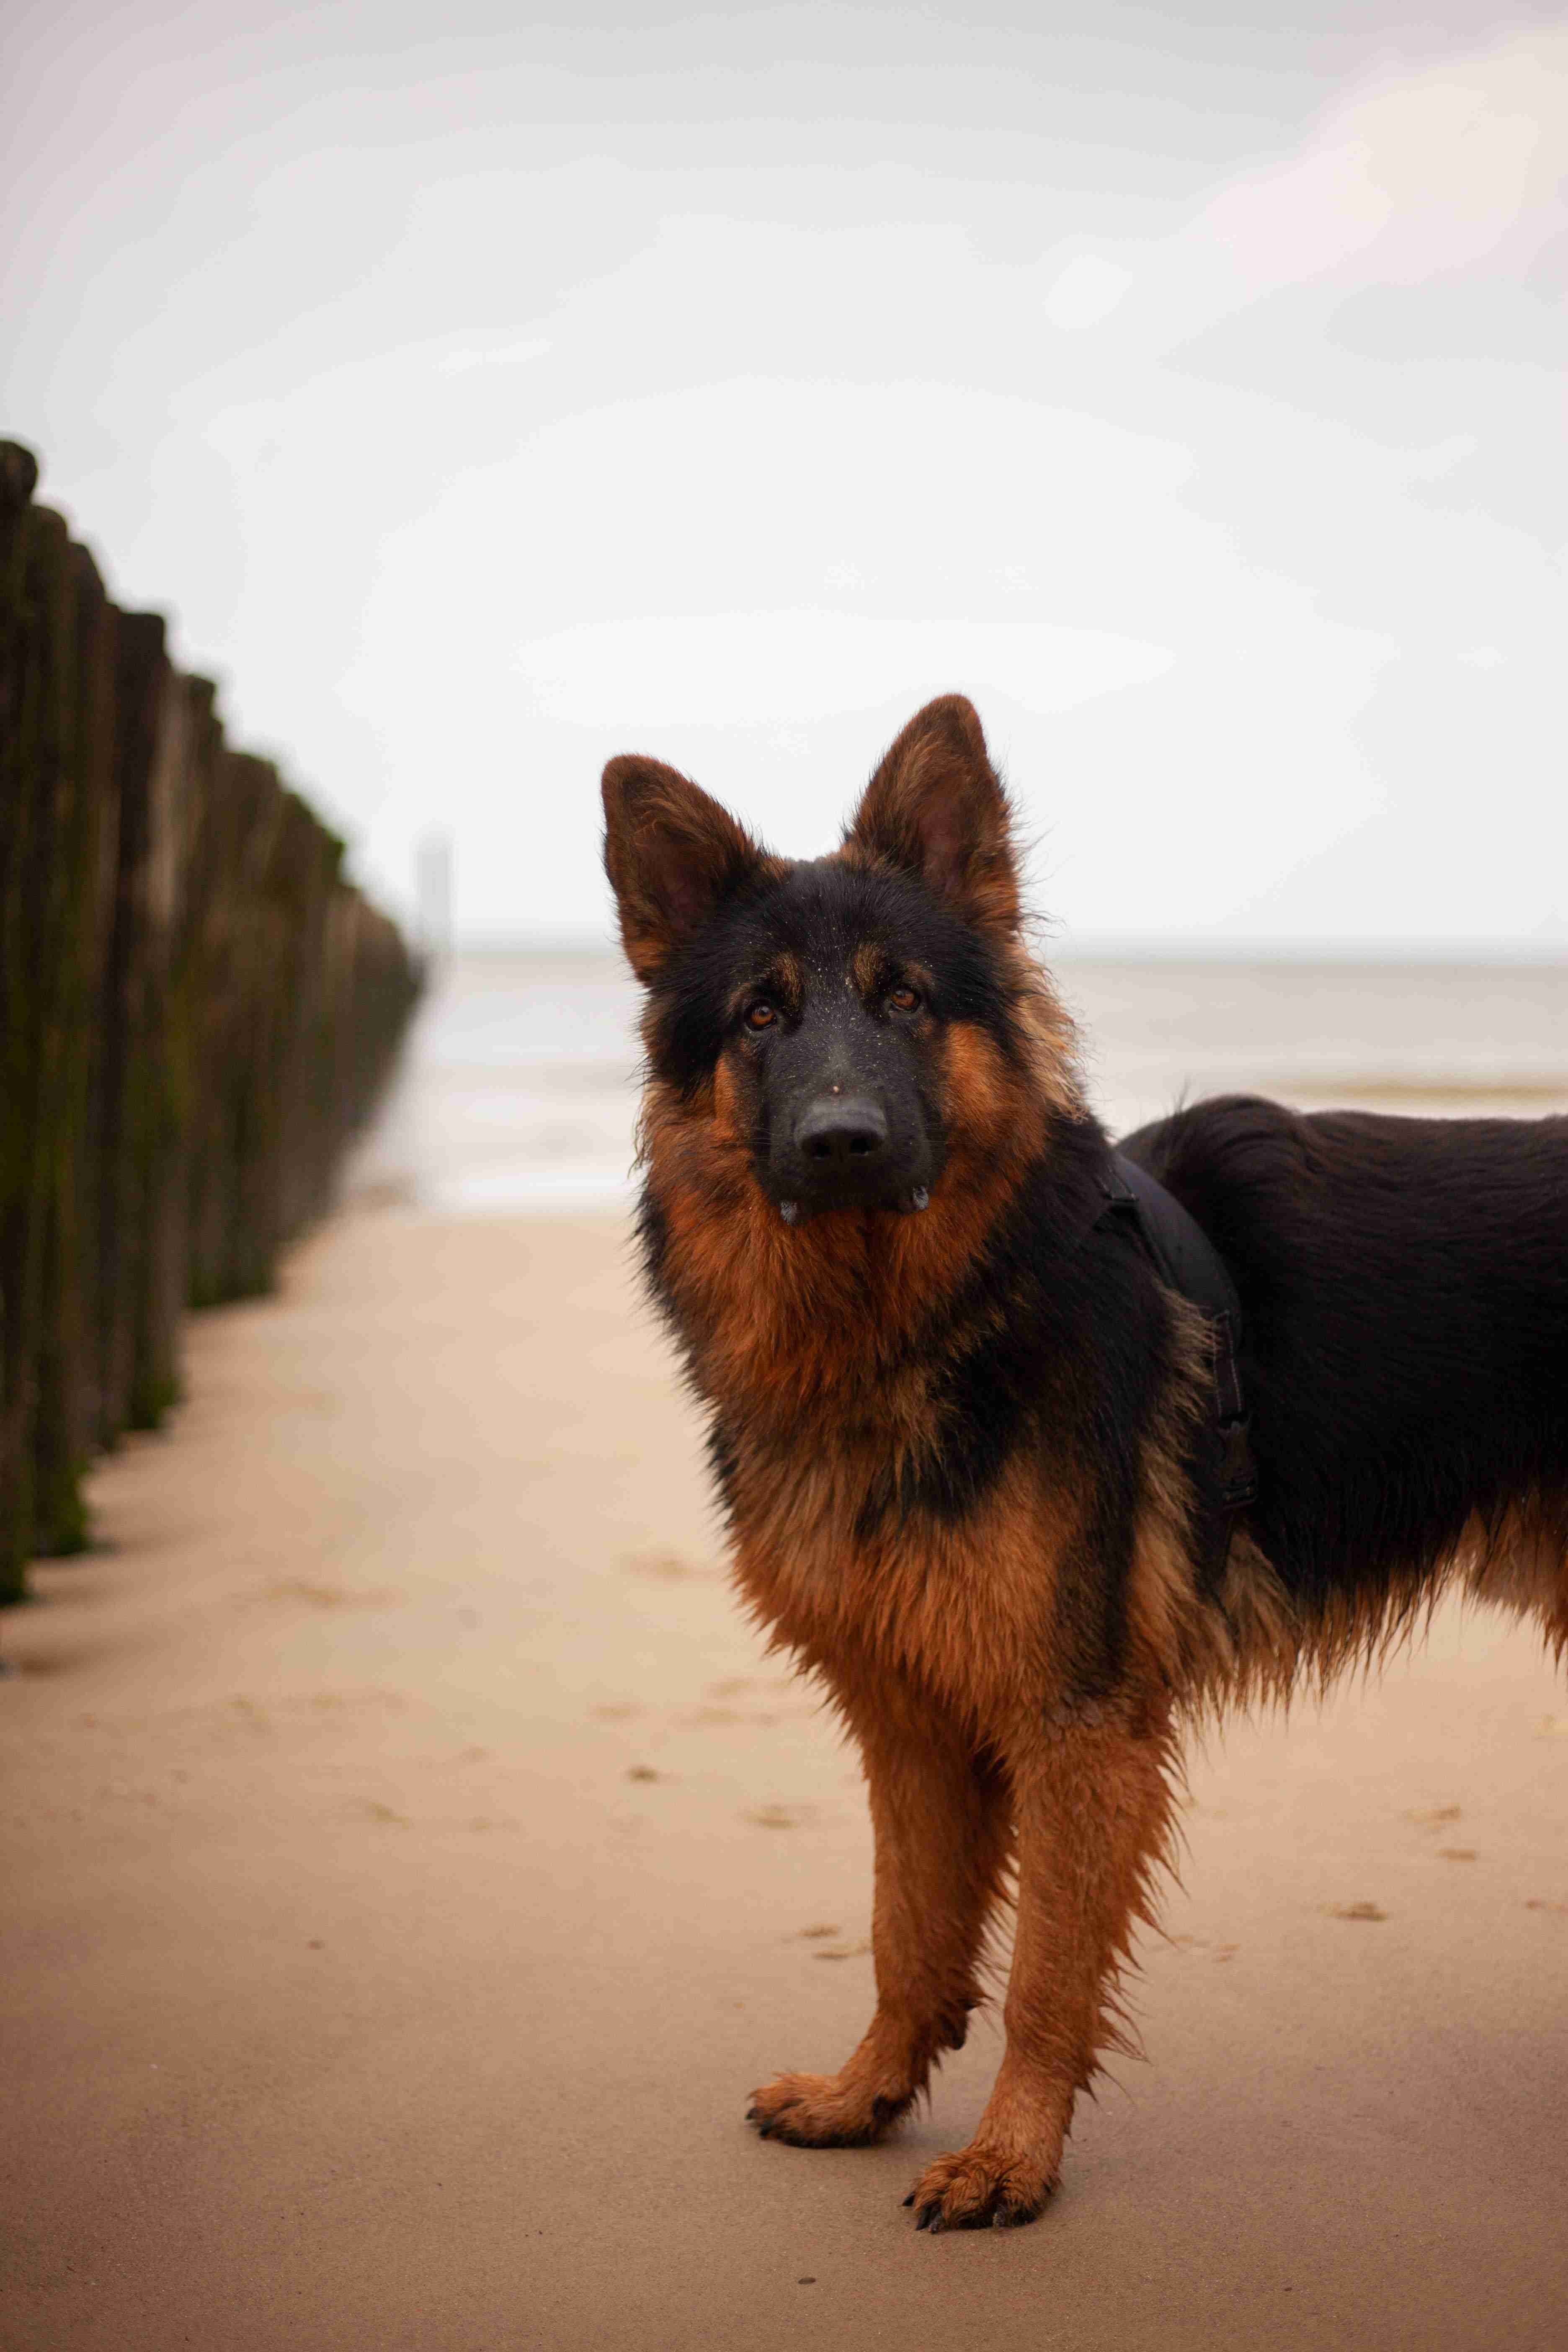 Can German shepherds be trained to become service dogs?